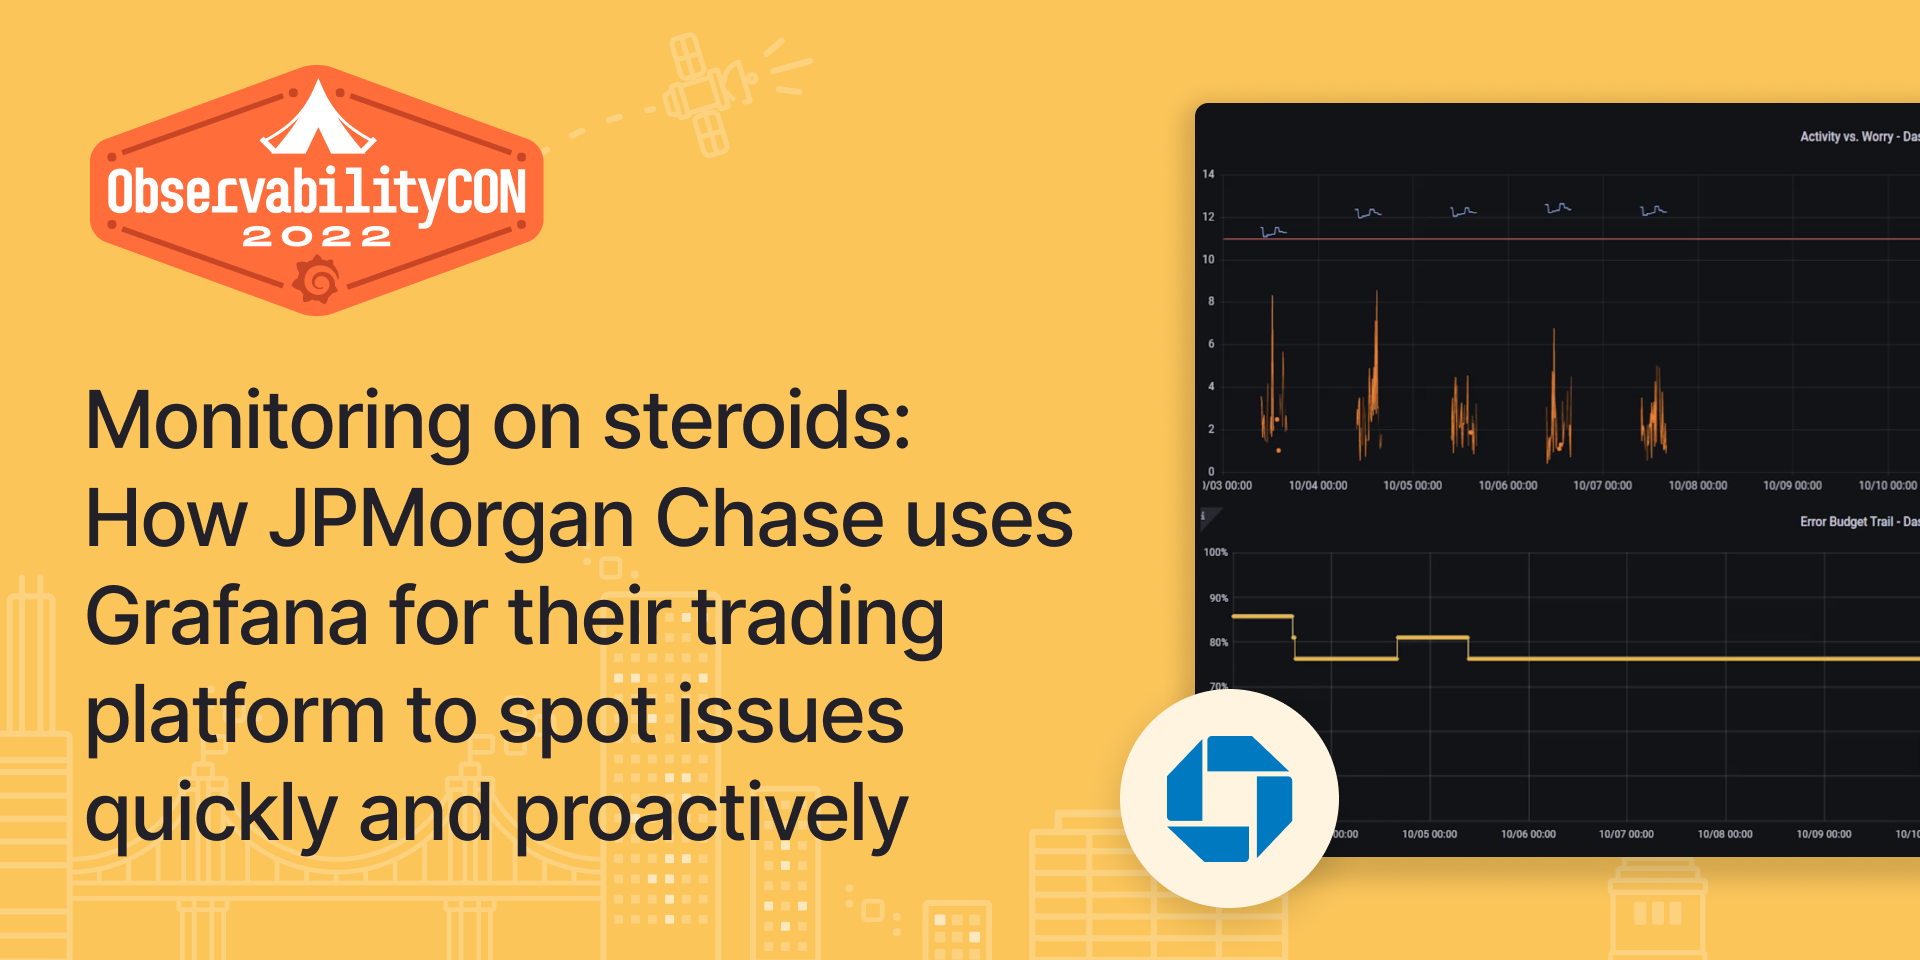 Monitoring on steroids: How JPMorgan Chase uses Grafana for their trading platform to spot issues quickly and proactively